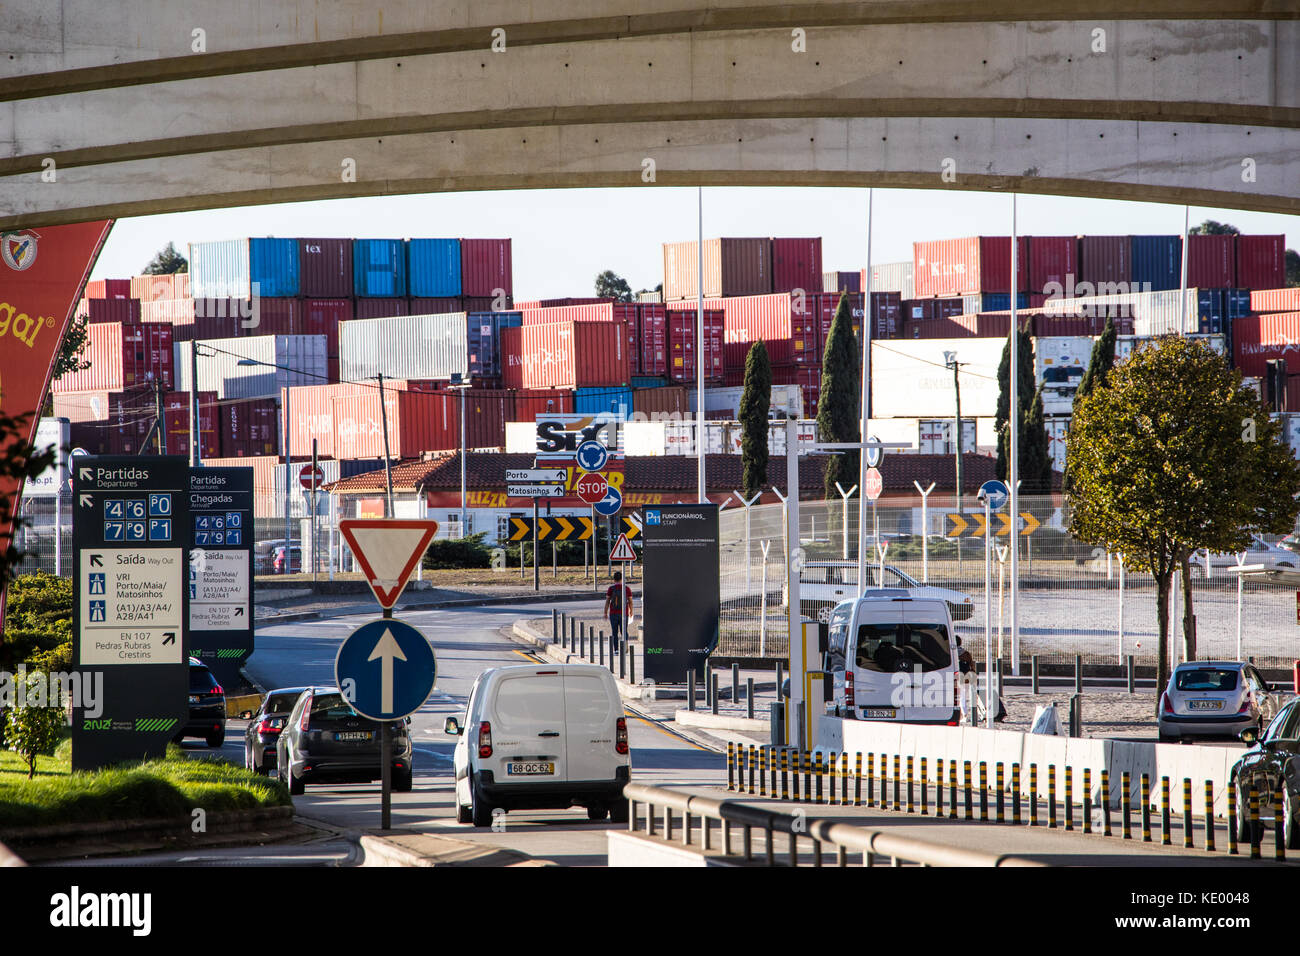 Shipping containers viewed from Aeroporto Francisco Sa Carneiro or Francisco Sa Carneiro Airport, Porto, Porttugal Stock Photo